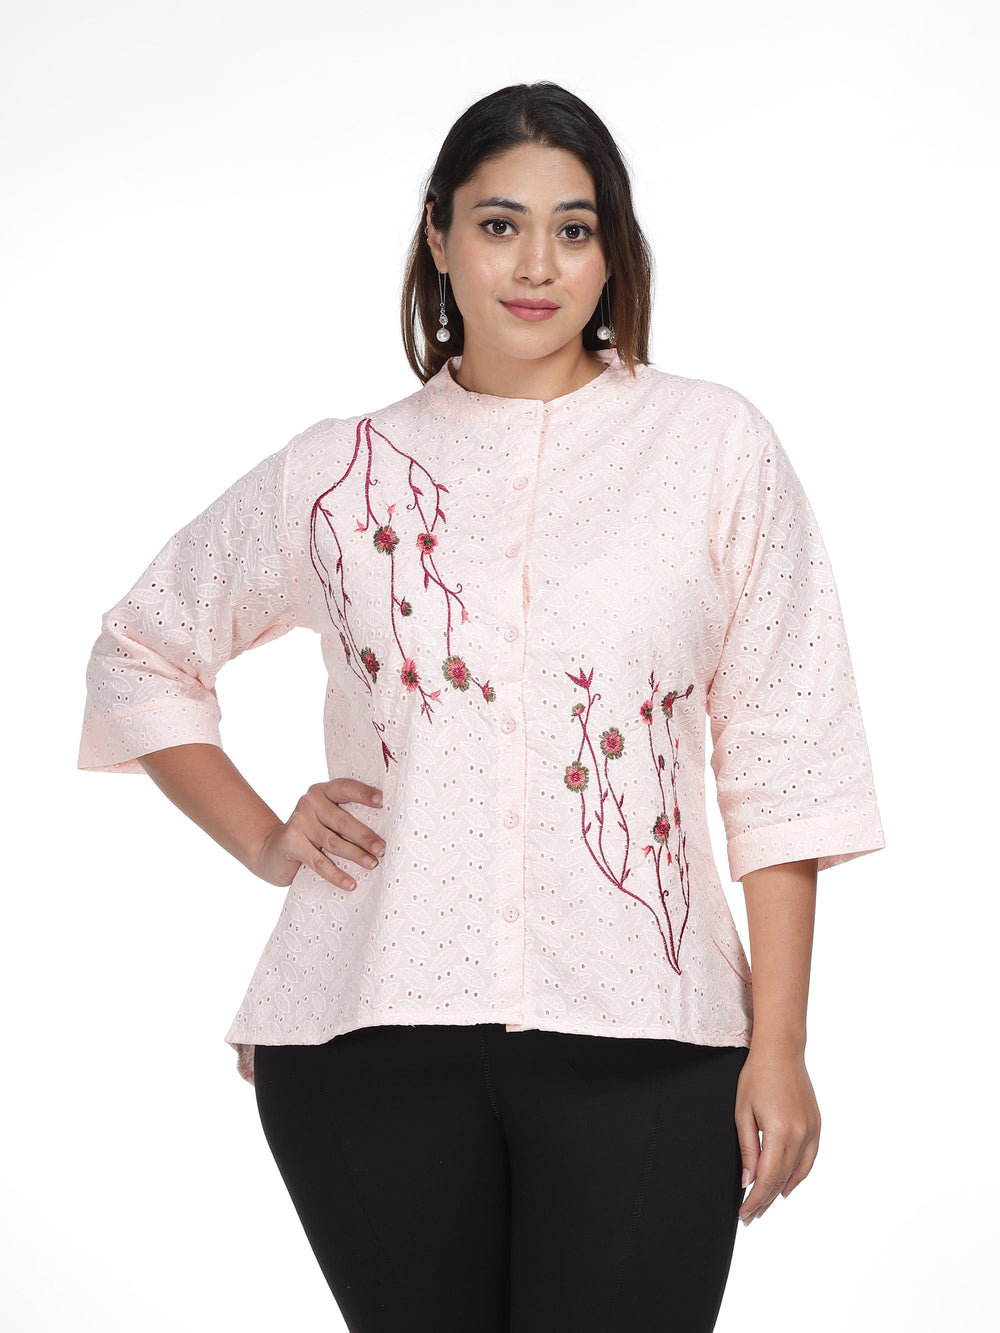 Embroidered Ladies Designer Cotton Tops, Size: S-XXL at Rs 450